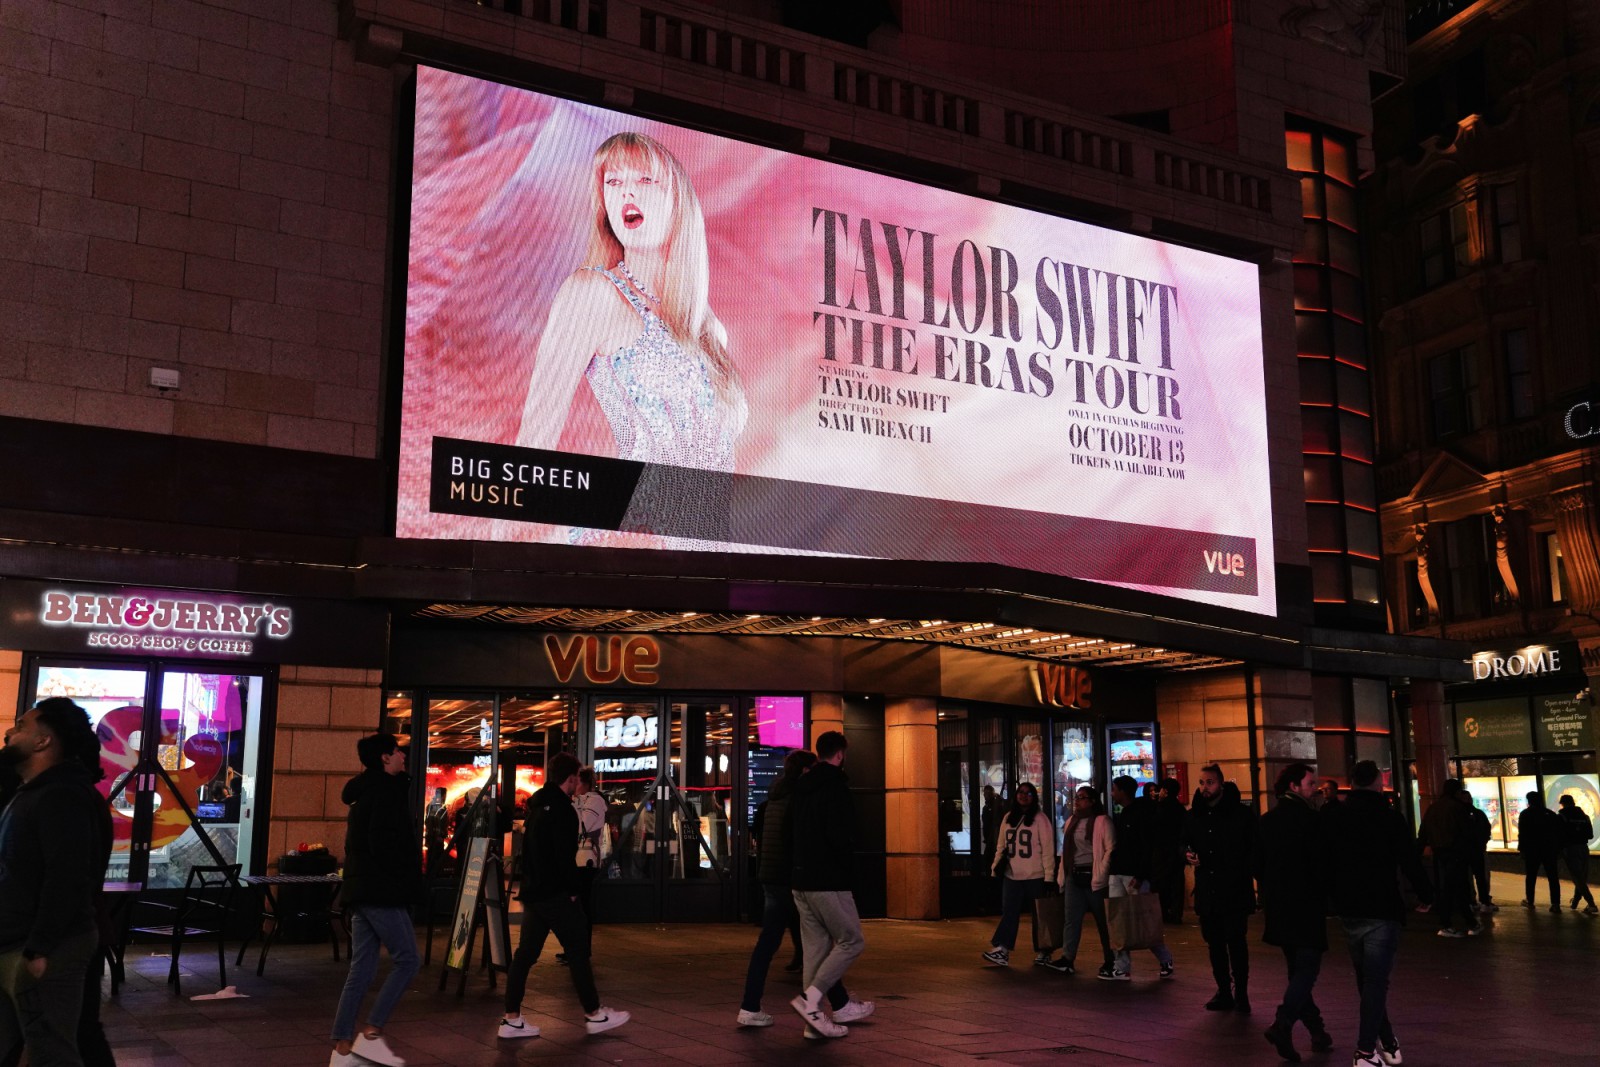 Taylor Swift Billboard's advertised outside a VUE building. People walking in both directions past the billboard in the evening.